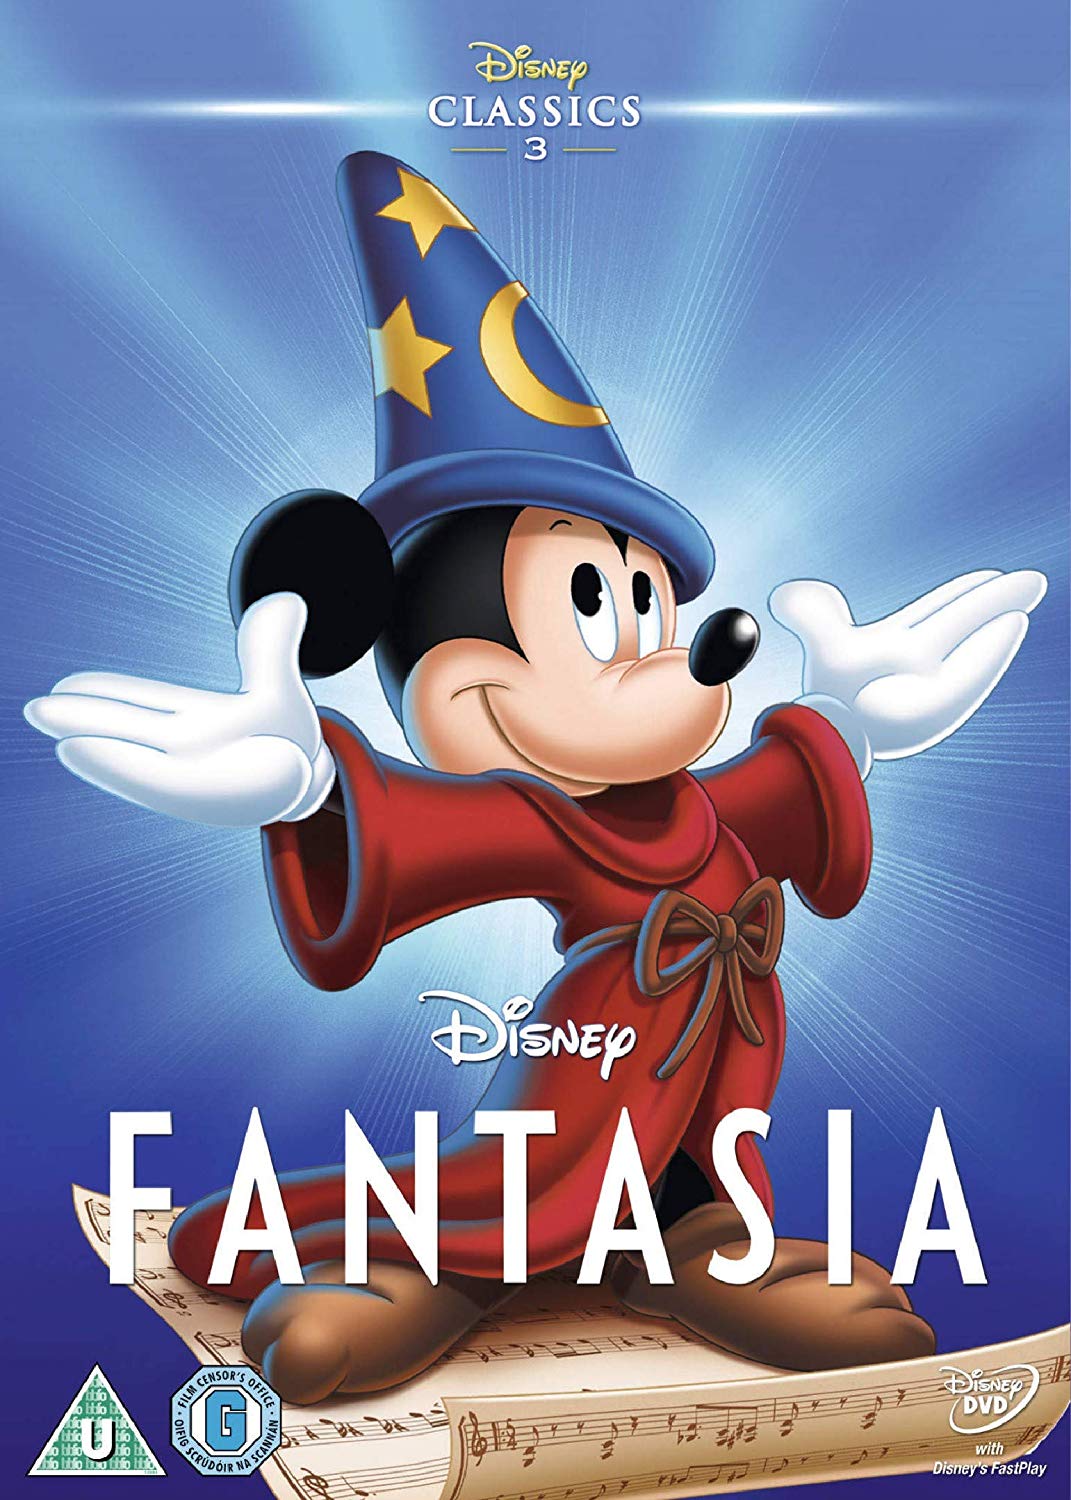 FANTASIA (MINI IN MALL AMUSEMENT PARK) AND IN MALL WATER PARK Franchise